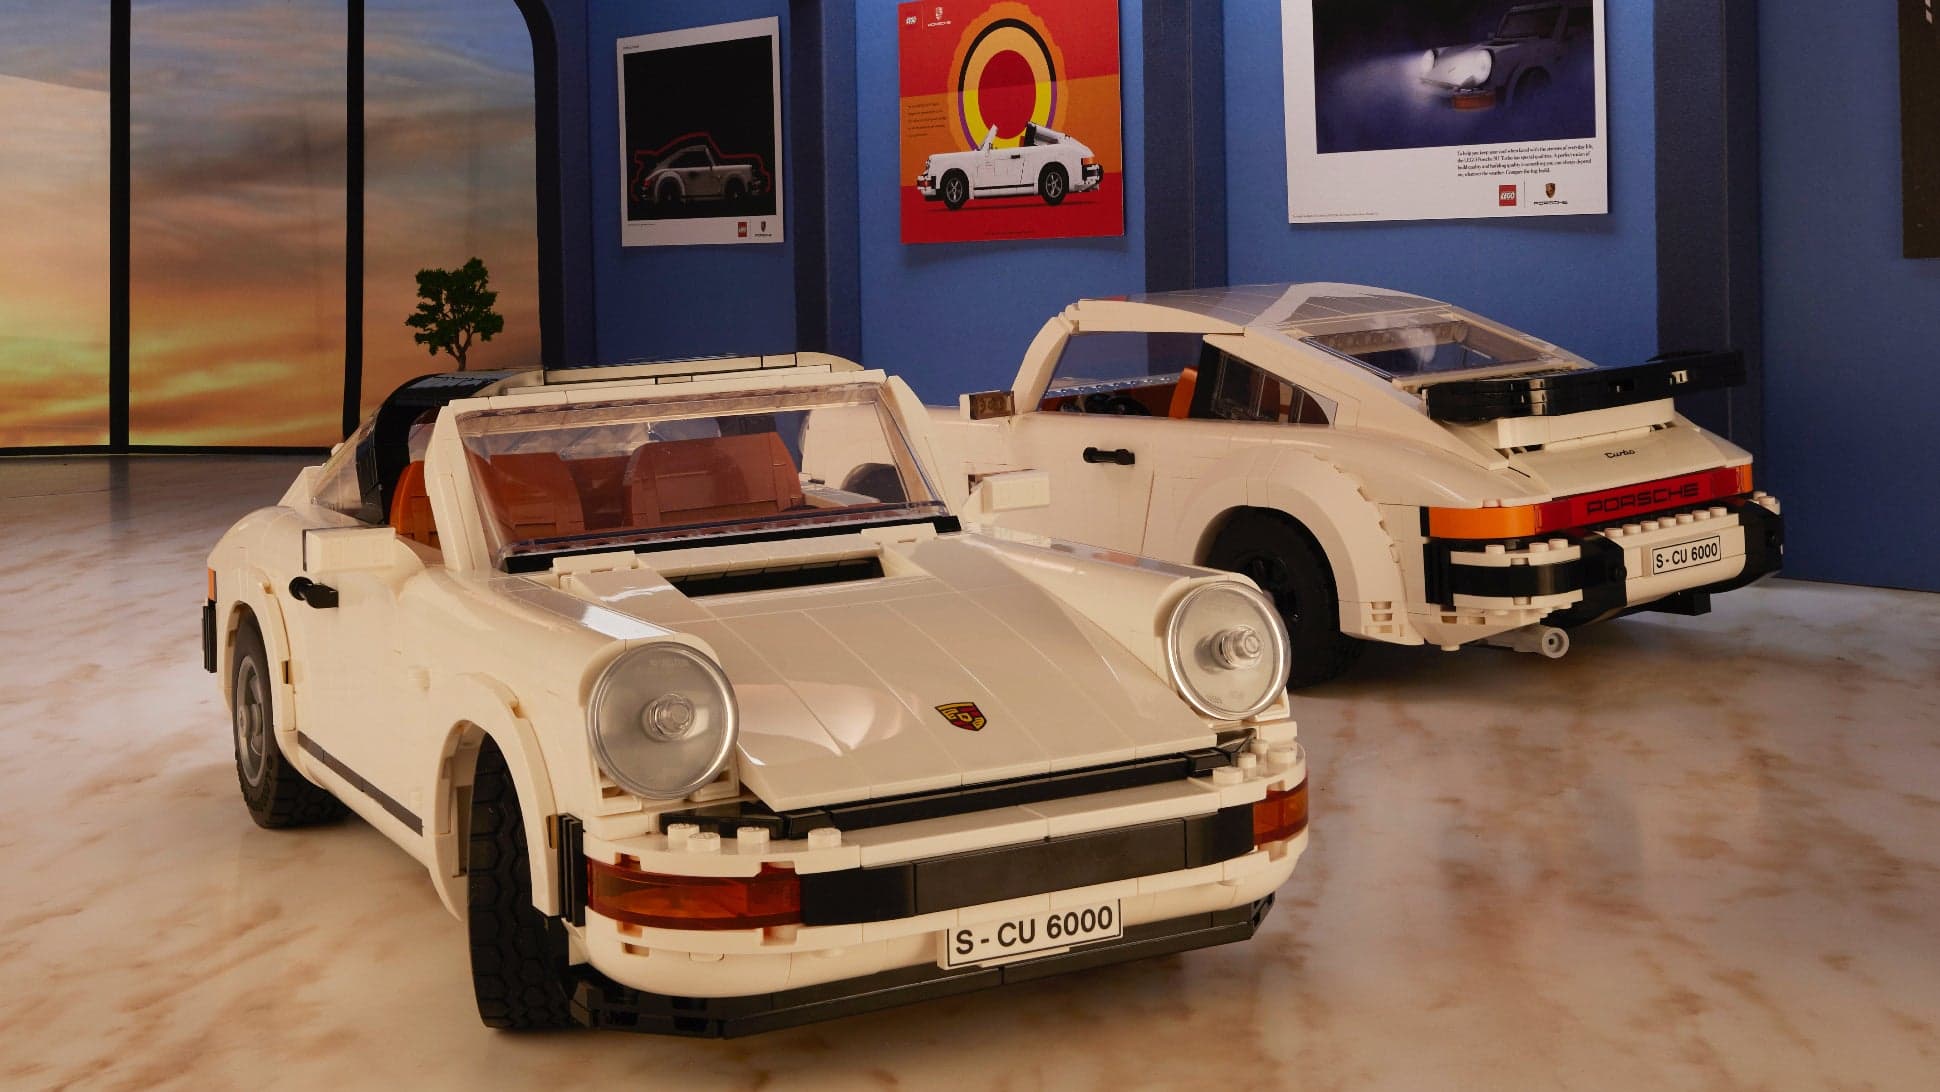 New 2-In-1 Porsche Lego Kit Can Be a 911 Turbo or a 911 Targa